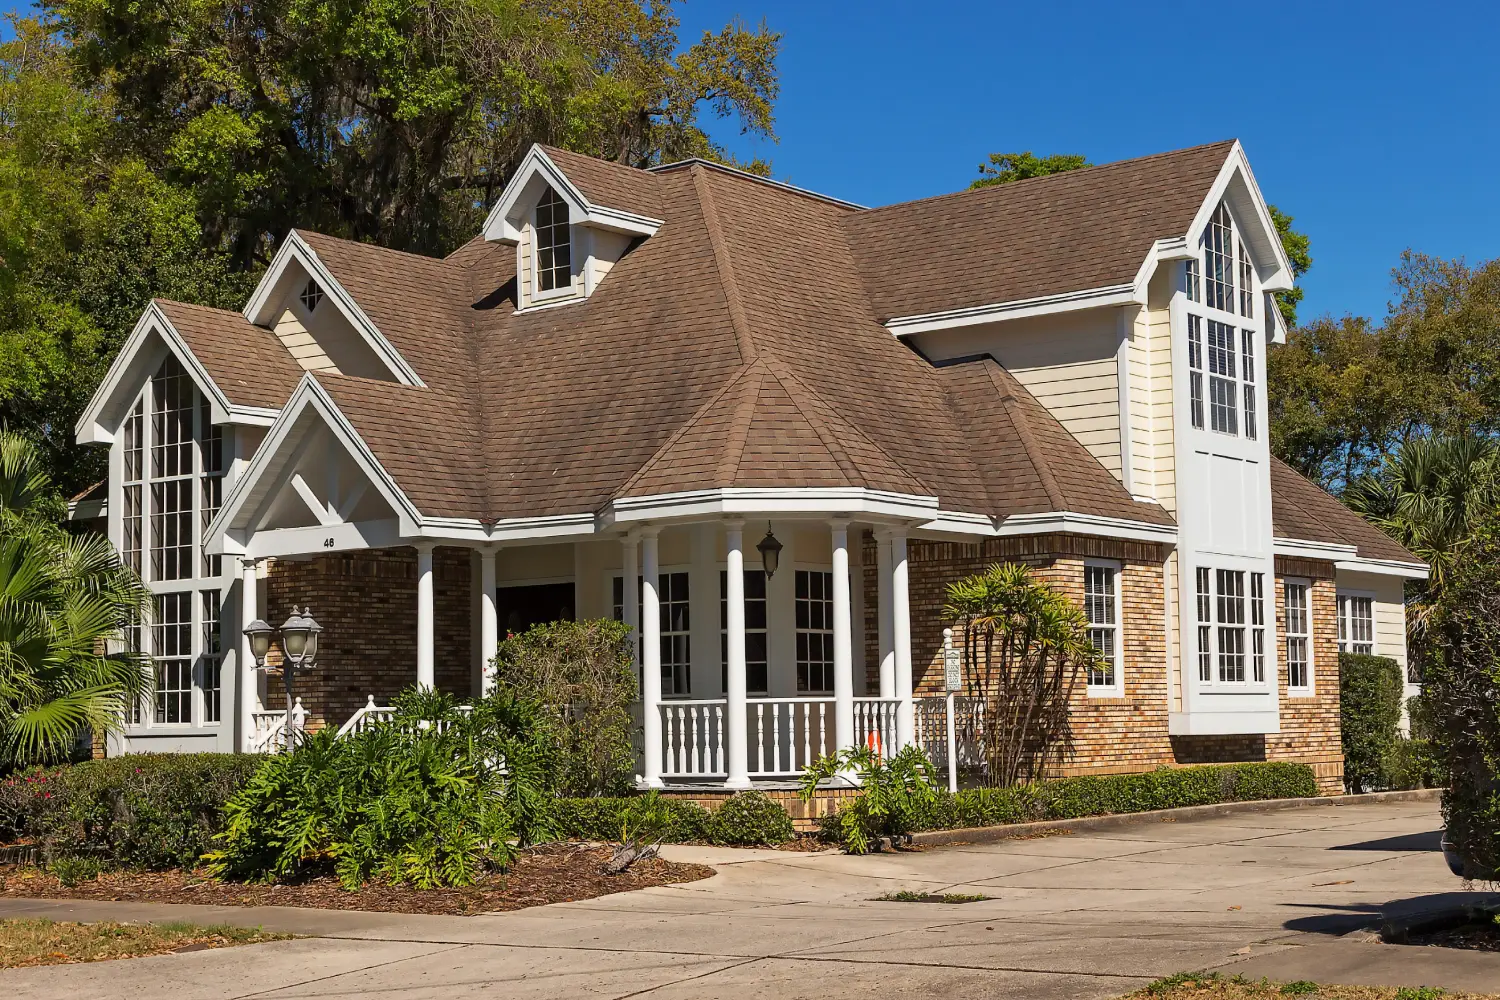 All About Roofing's Exemplary Services